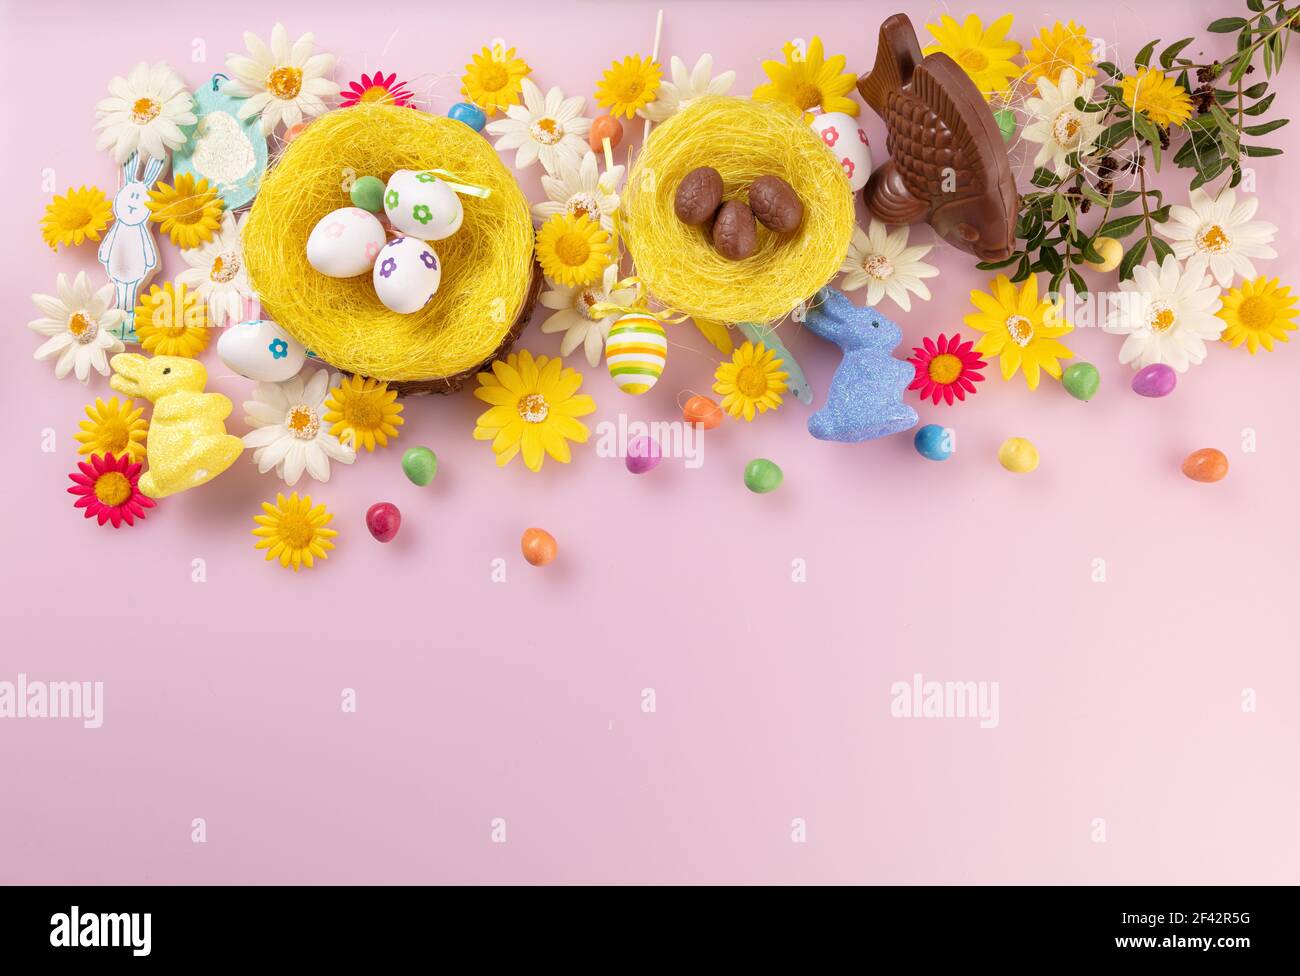 https://c8.alamy.com/comp/2F42R5G/fish-and-milk-chocolate-egg-with-easter-decoration-on-pink-background-seen-from-top-view-with-space-to-write-2F42R5G.jpg